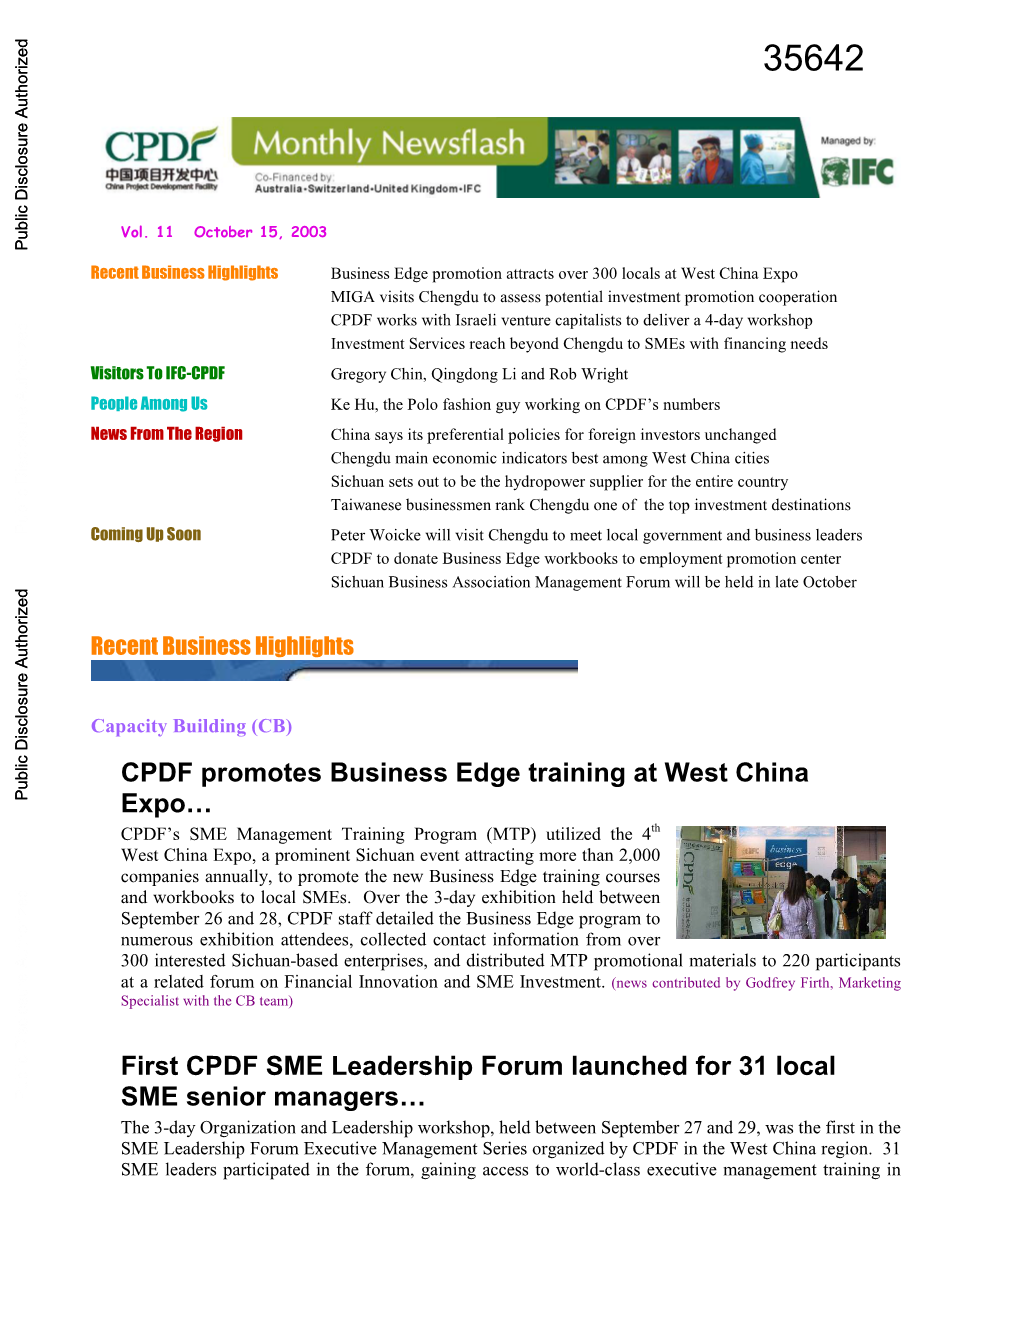 CPDF Promotes Business Edge Training At